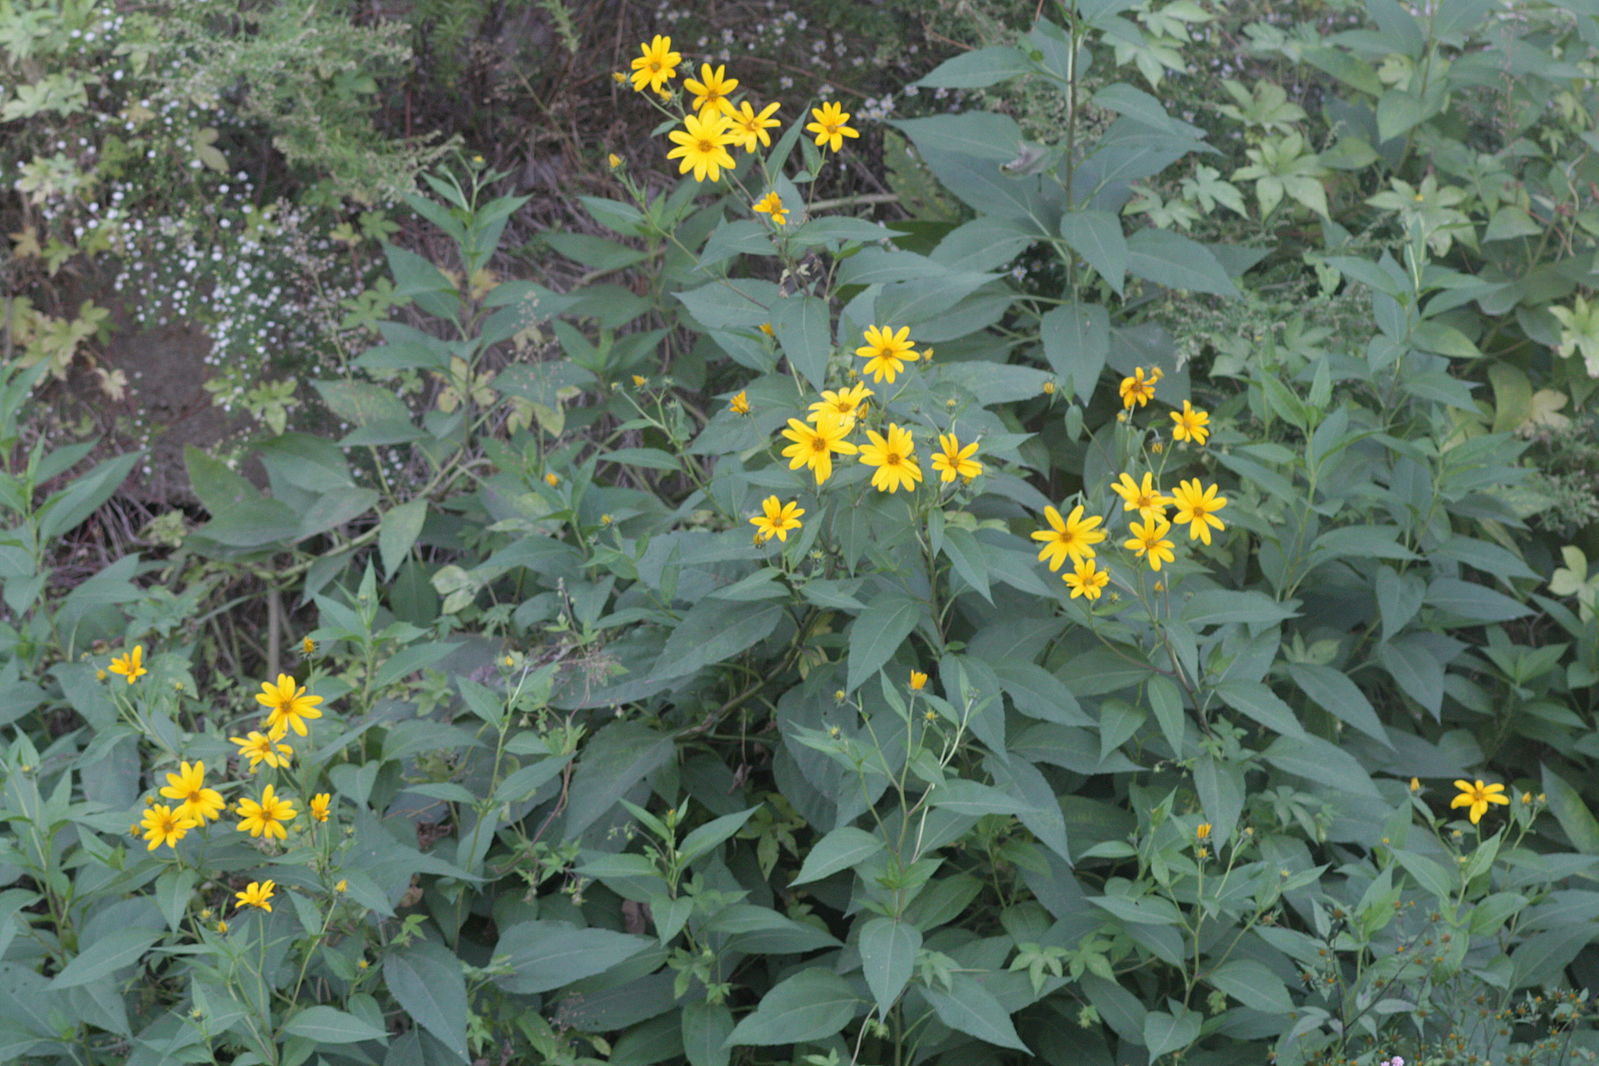 A plant of Jerusalem artichoke, there are many dark green leaves with a rough, hairy texture, and groups of the small yellow flowers